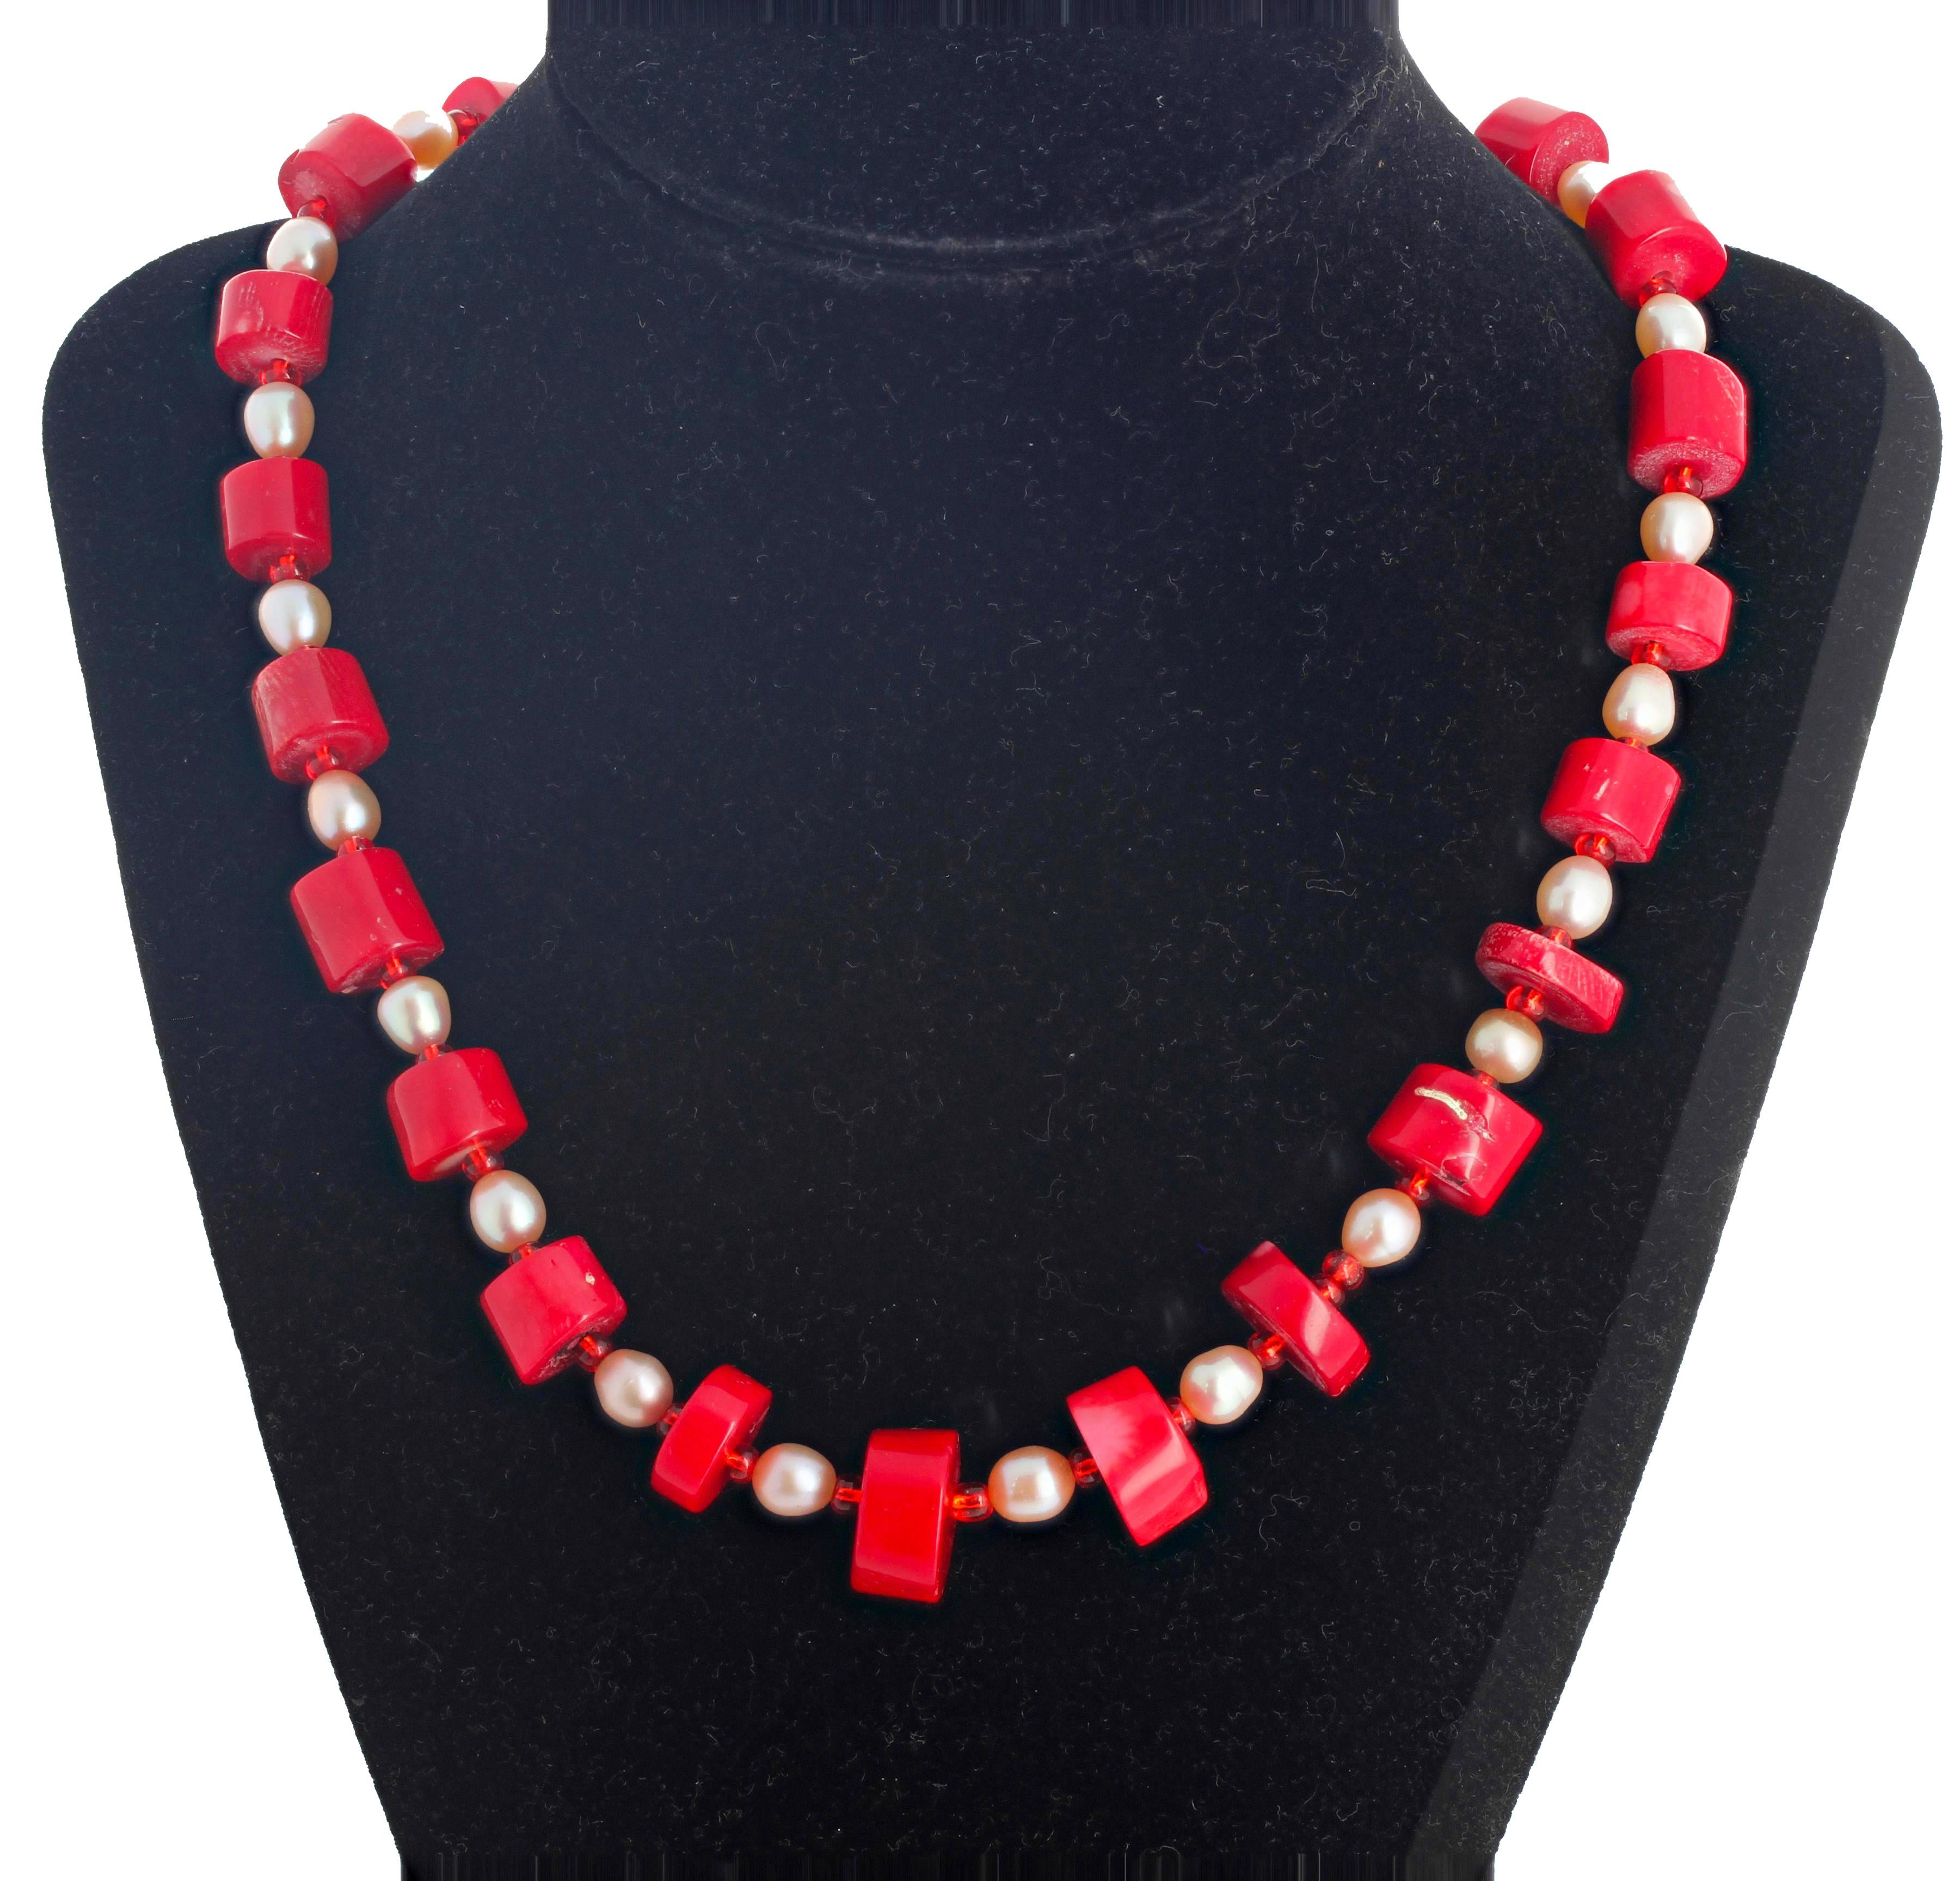 Unique natural red Bamboo Coral enhanced with real cultured Pearls and accented with little sparkling crystals set in this 18 inch long necklace with easy to use goldy hook clasp.  The largest Coral is approximately 15 mm.  